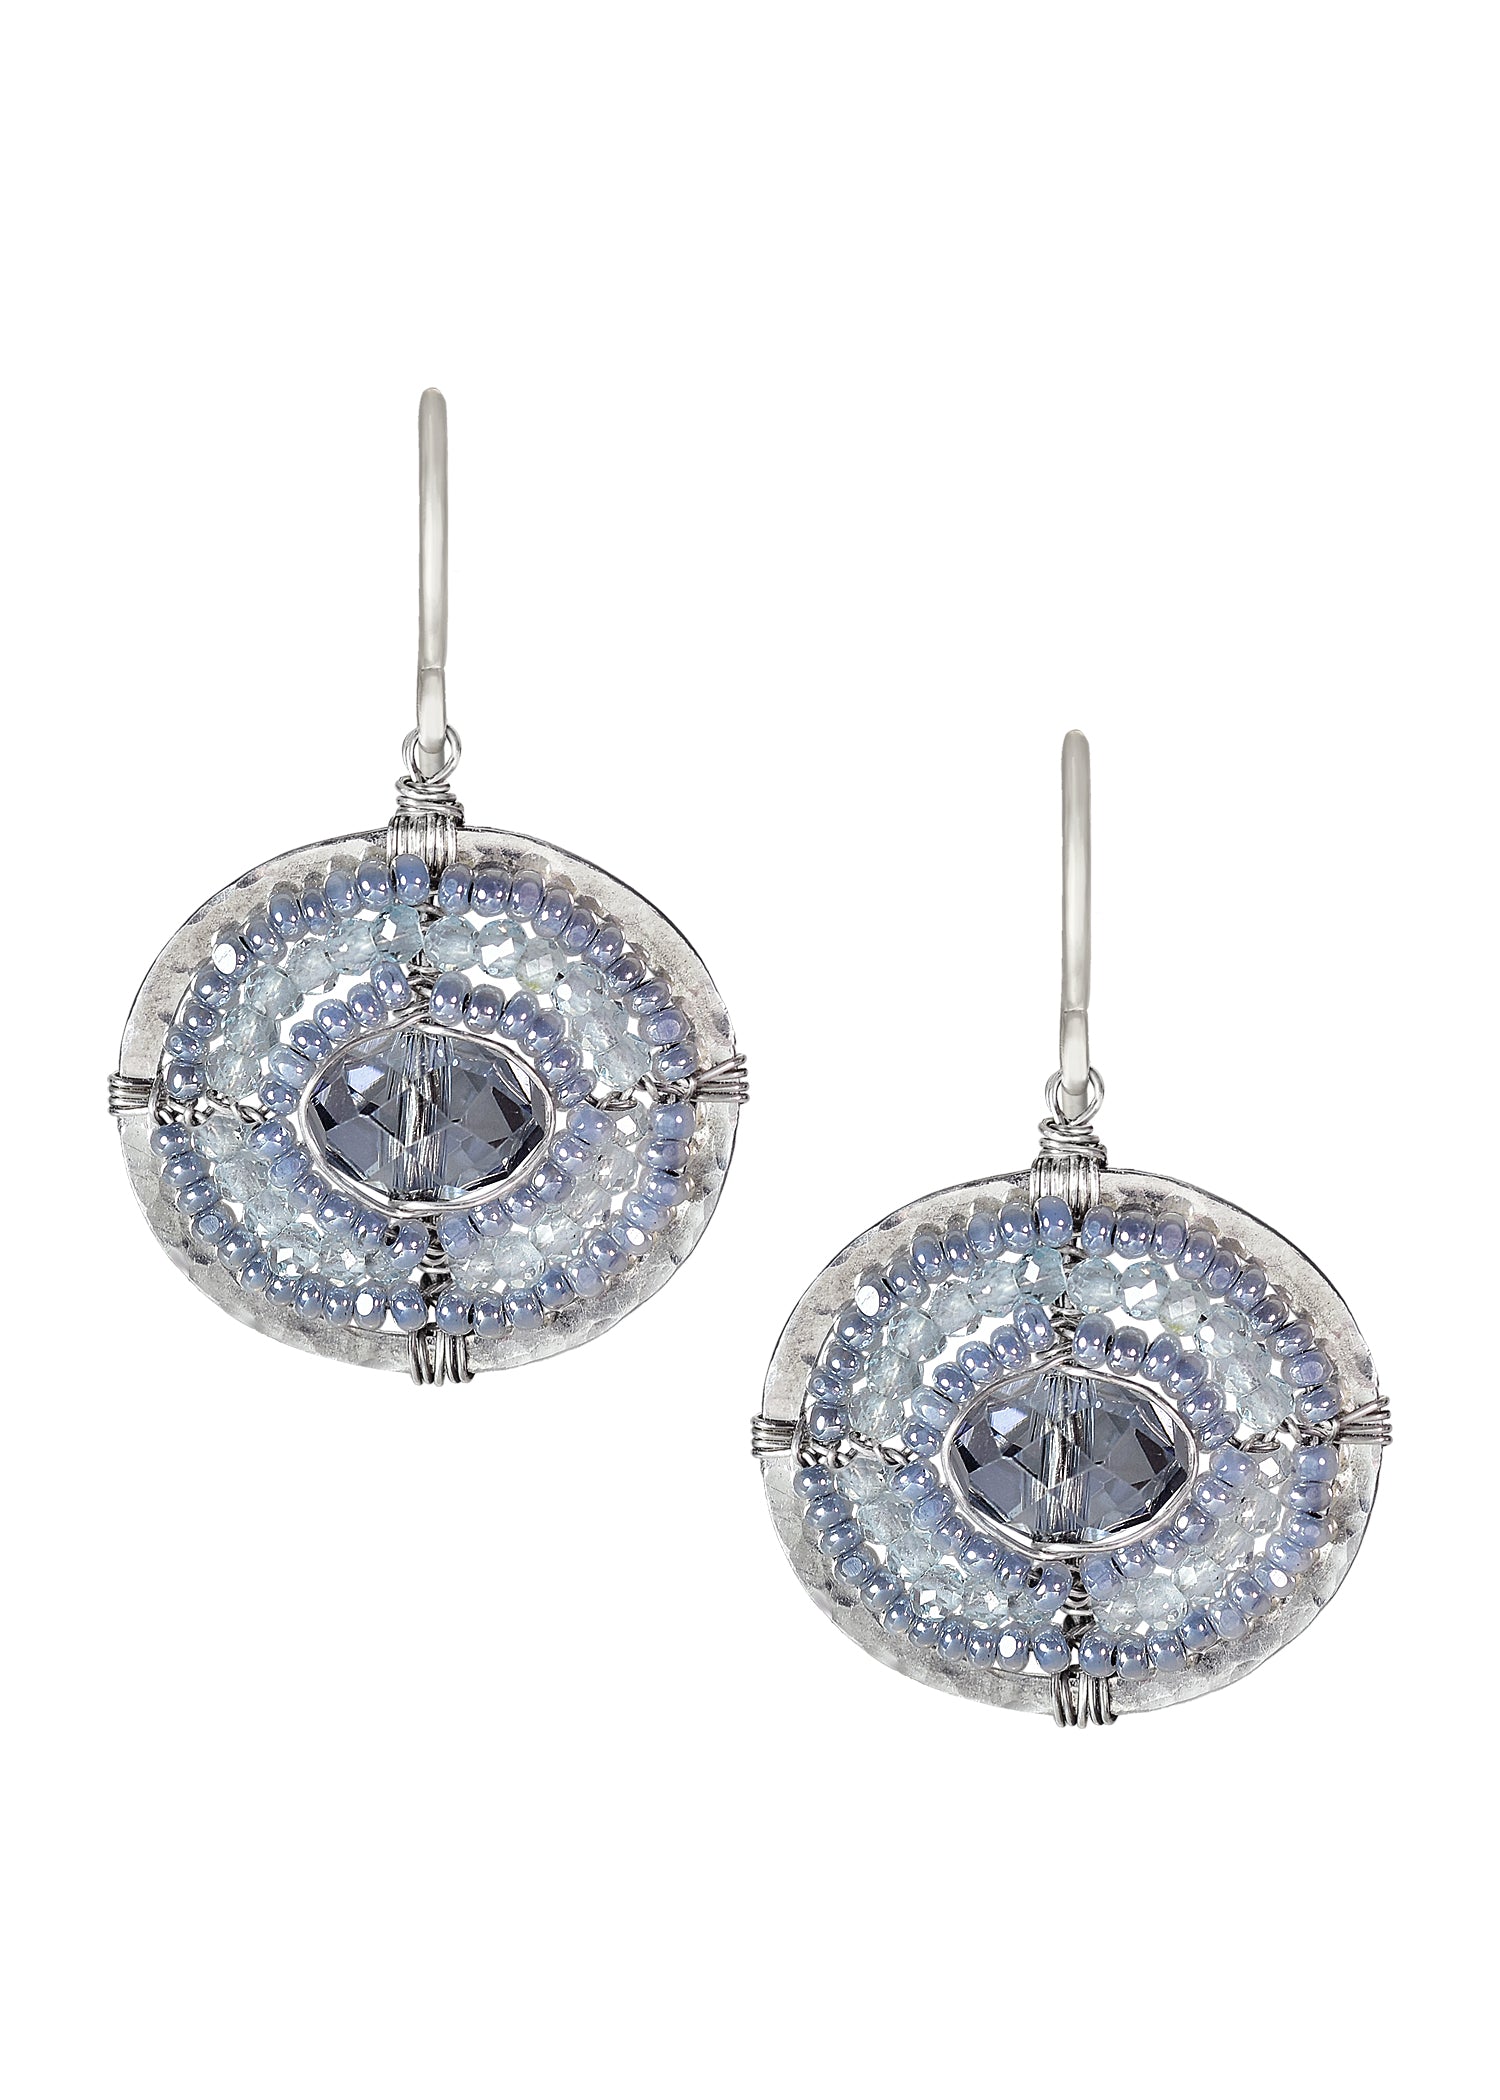 Crystal Seed beads Sterling silver Earrings measure 1-1/8" in length (including the ear wires) and 3/4" in width at the widest point Handmade in our Los Angeles studio